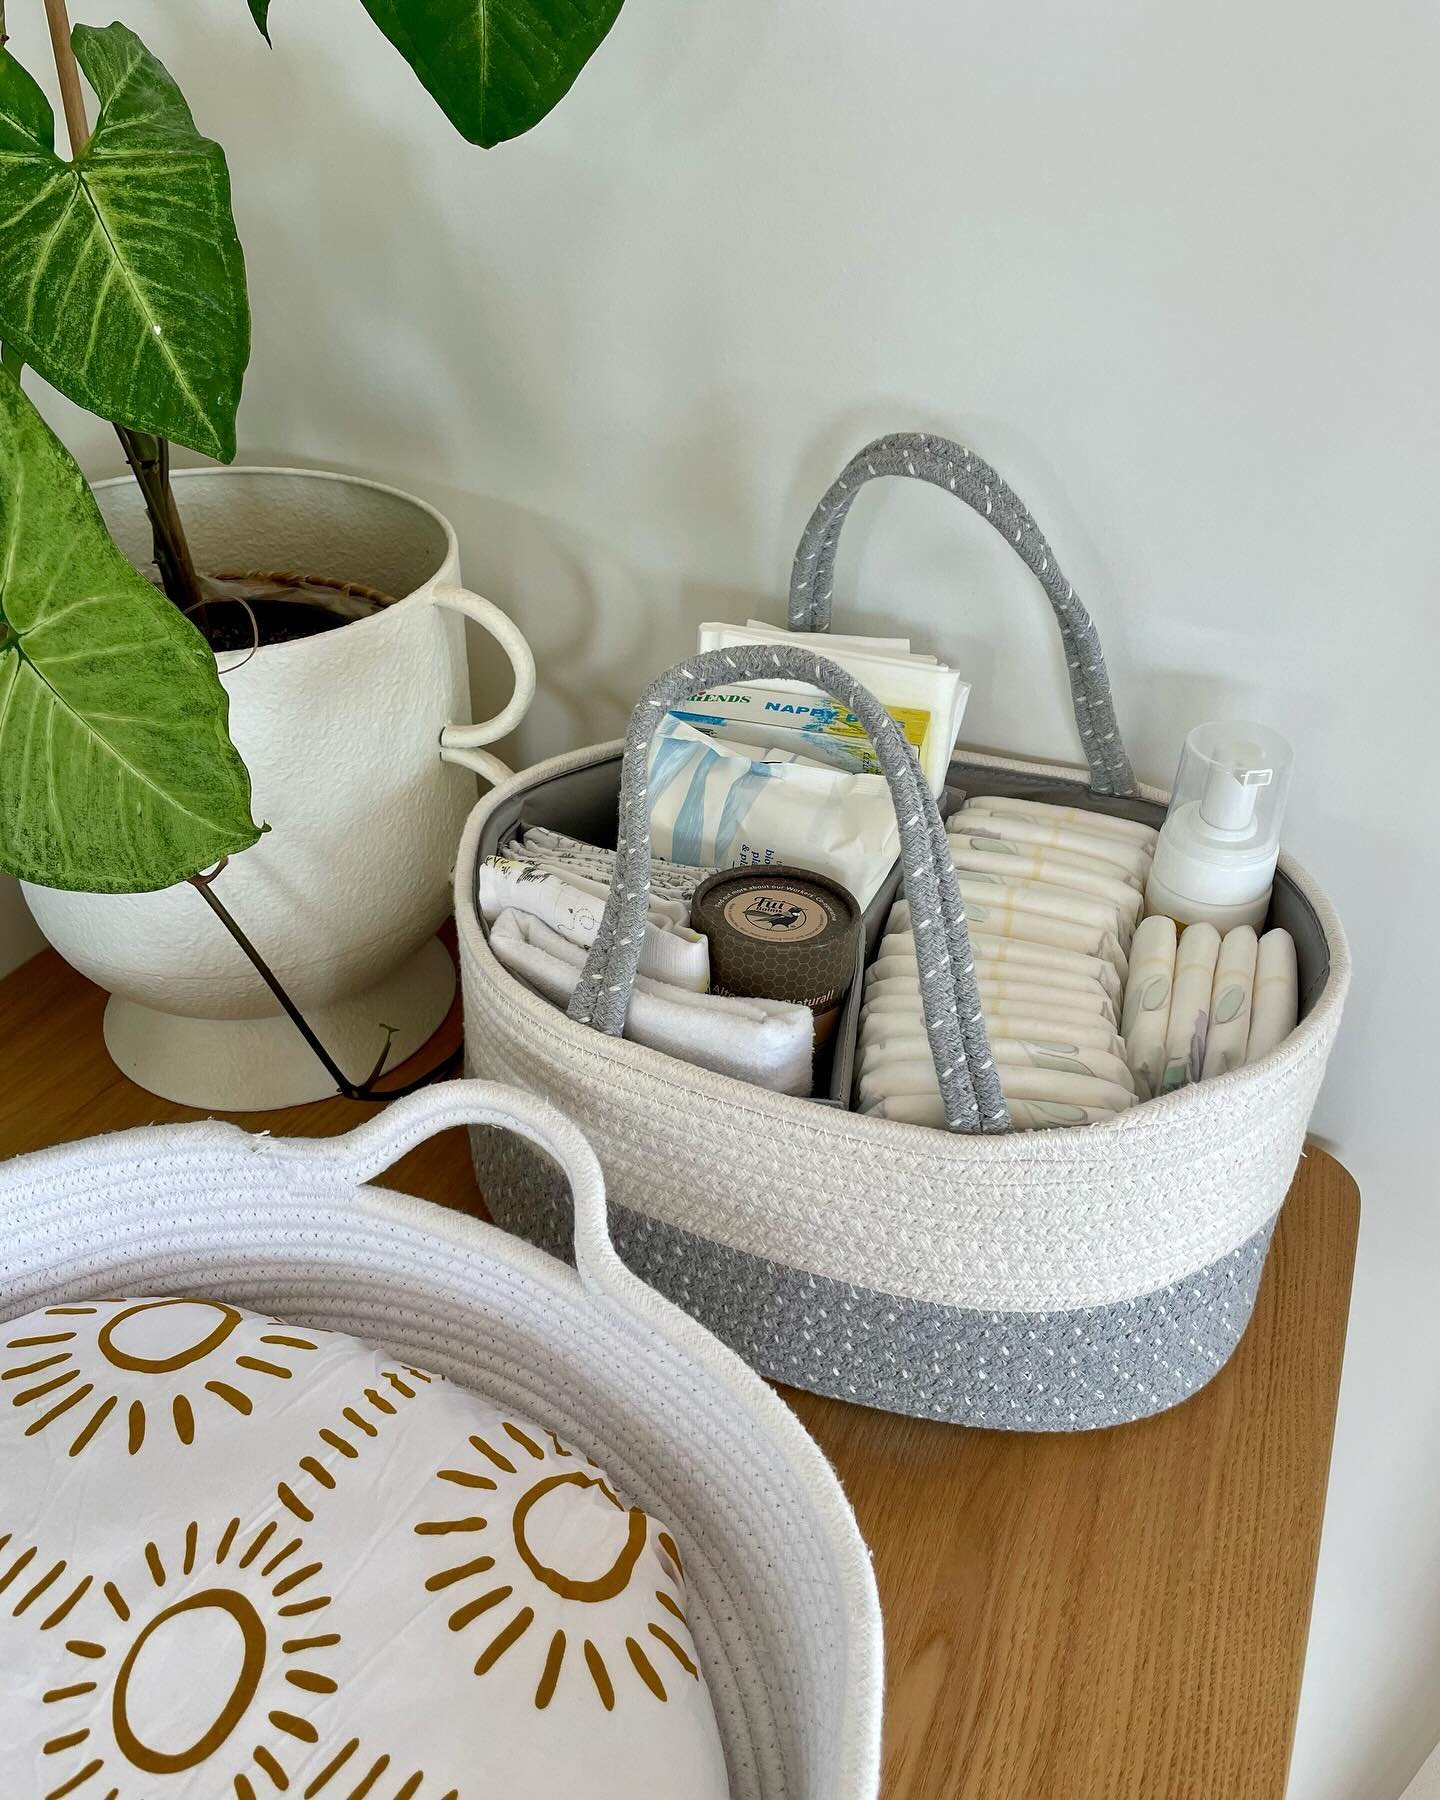 👝POSTPARTUM CADDY&rsquo;S👝

It is important to set up your postpartum space so that you have things readily available or easily accessible when needed. 

You don&rsquo;t want to go to the toilet and realise you don&rsquo;t have any pads, or start f